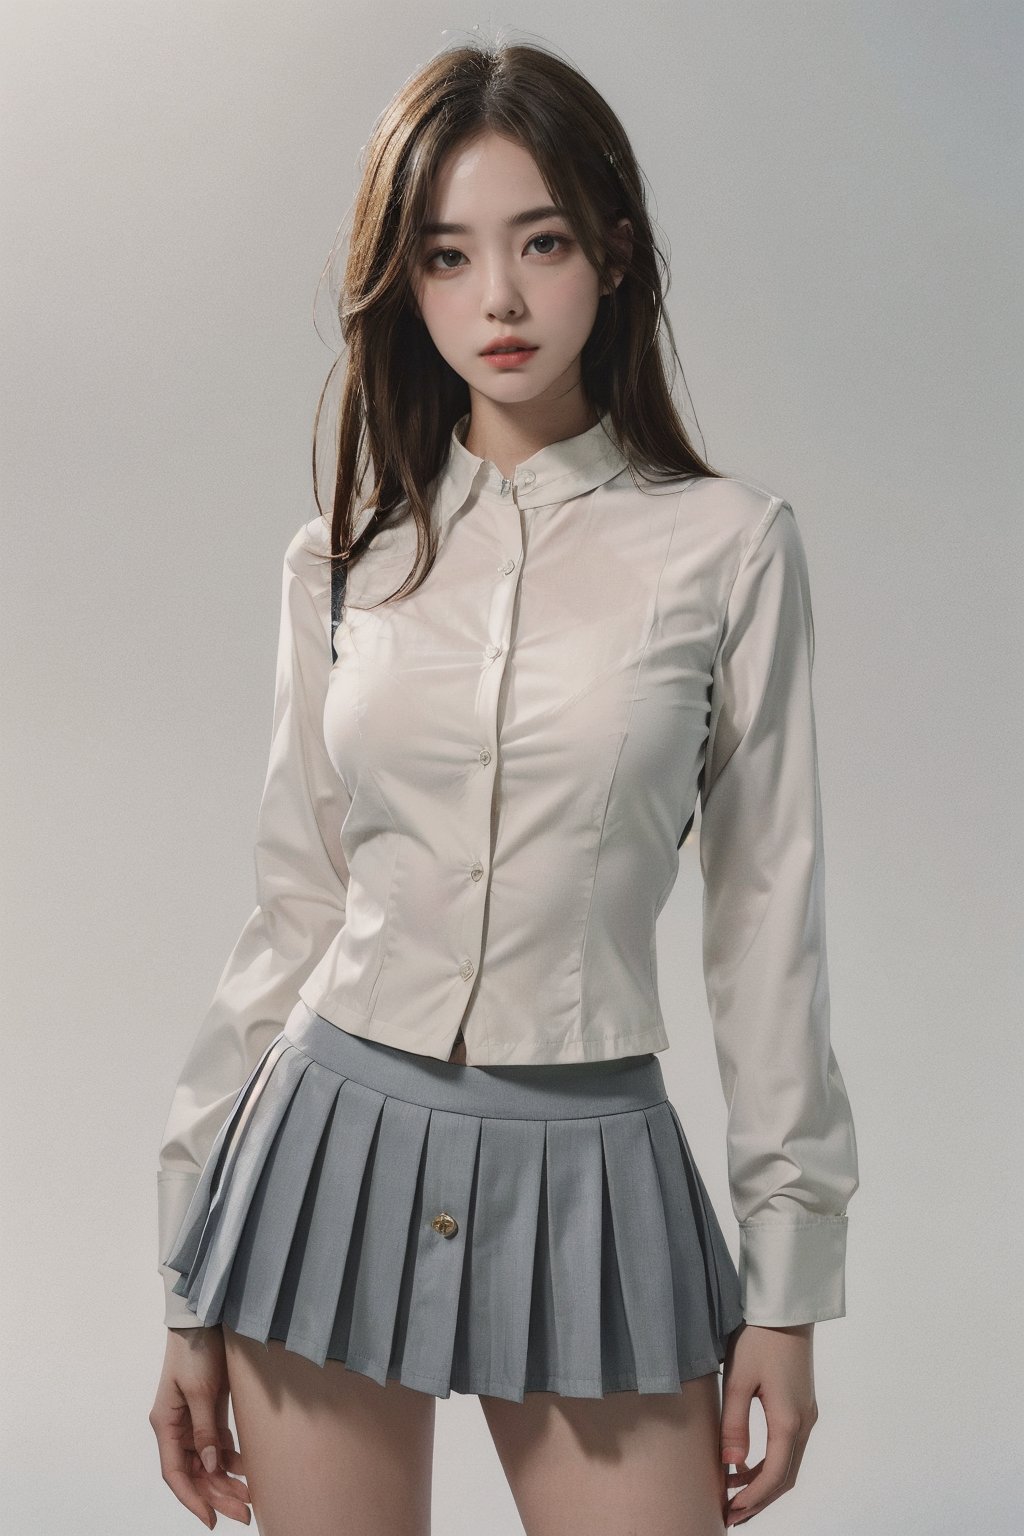 8k, best quality, masterpiece, realistic, ultra detail, photo realistic, Increase quality, look at viewer, soft expression, simple_background, (white button shirt),(grey miniskirt),fashion,